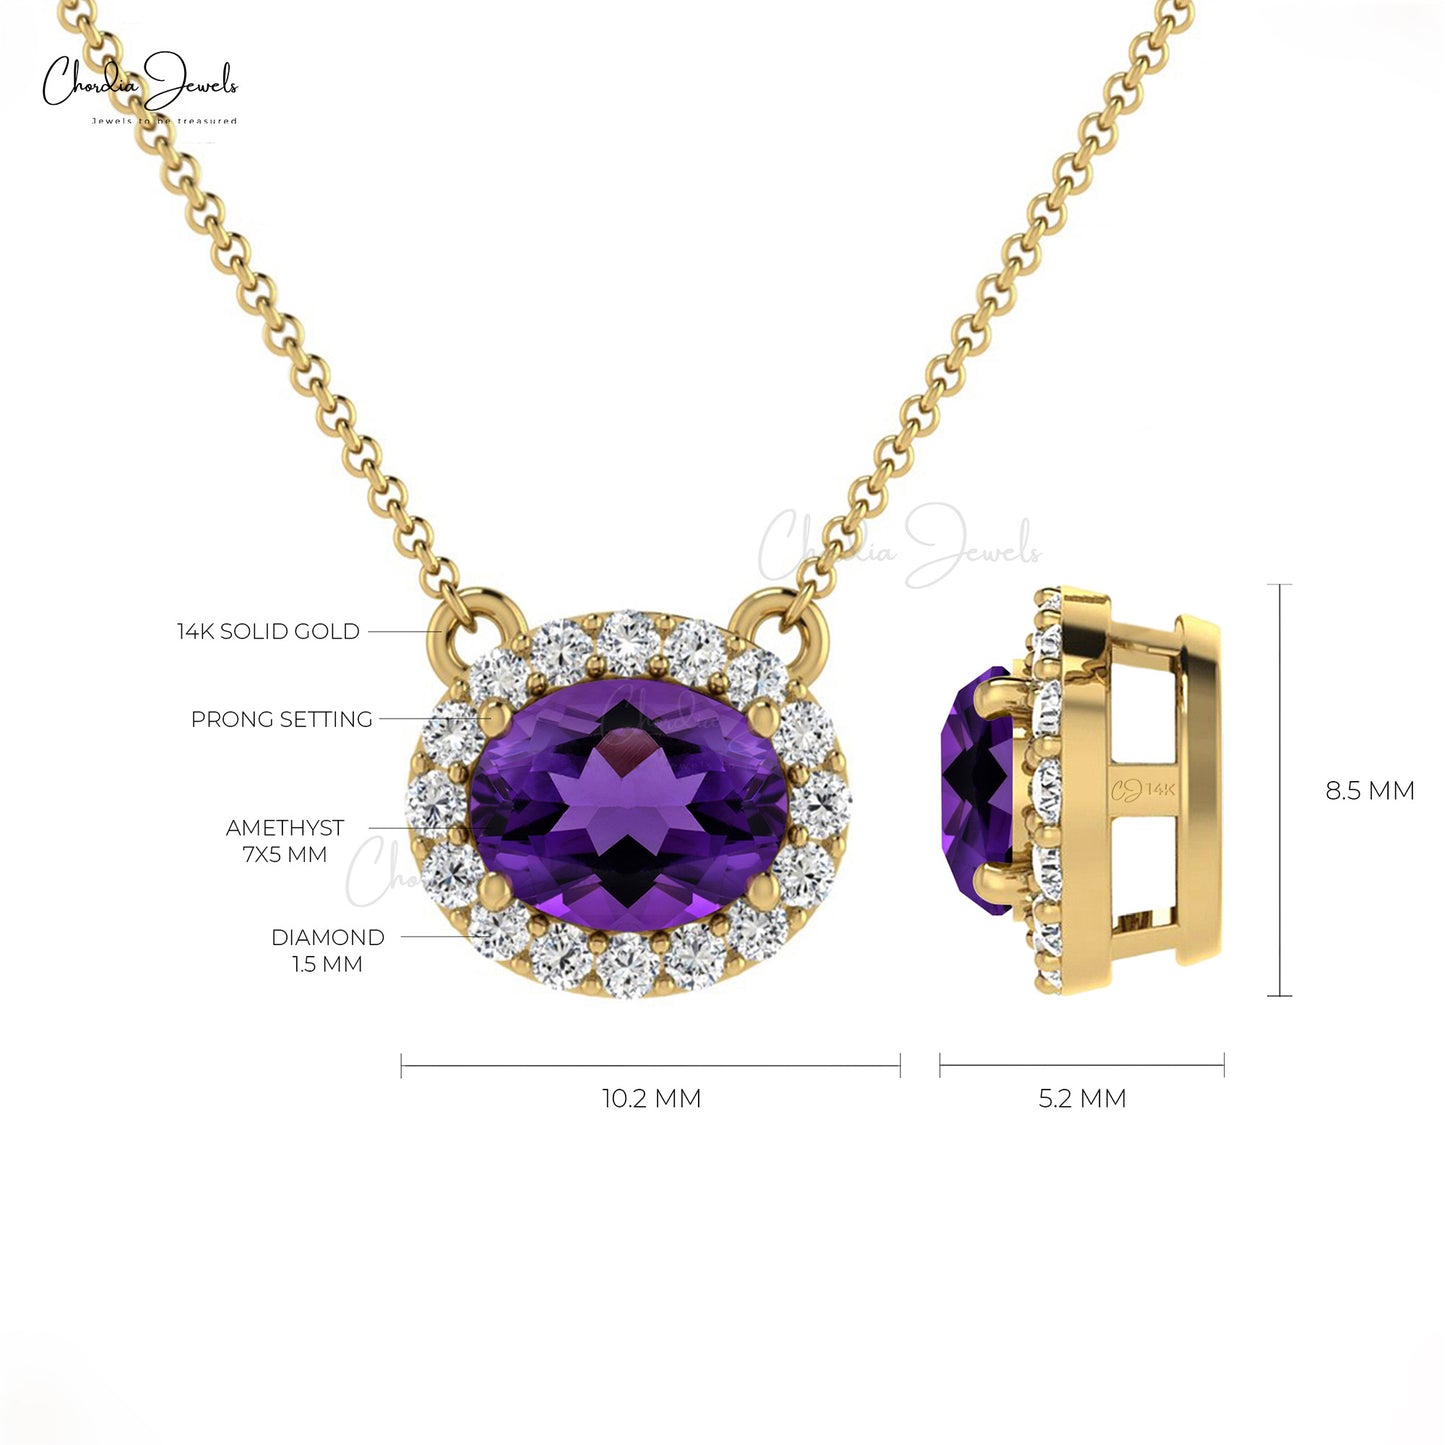 7x5mm Oval Shaped Amethyst Diamond Halo Necklace in 14K Gold